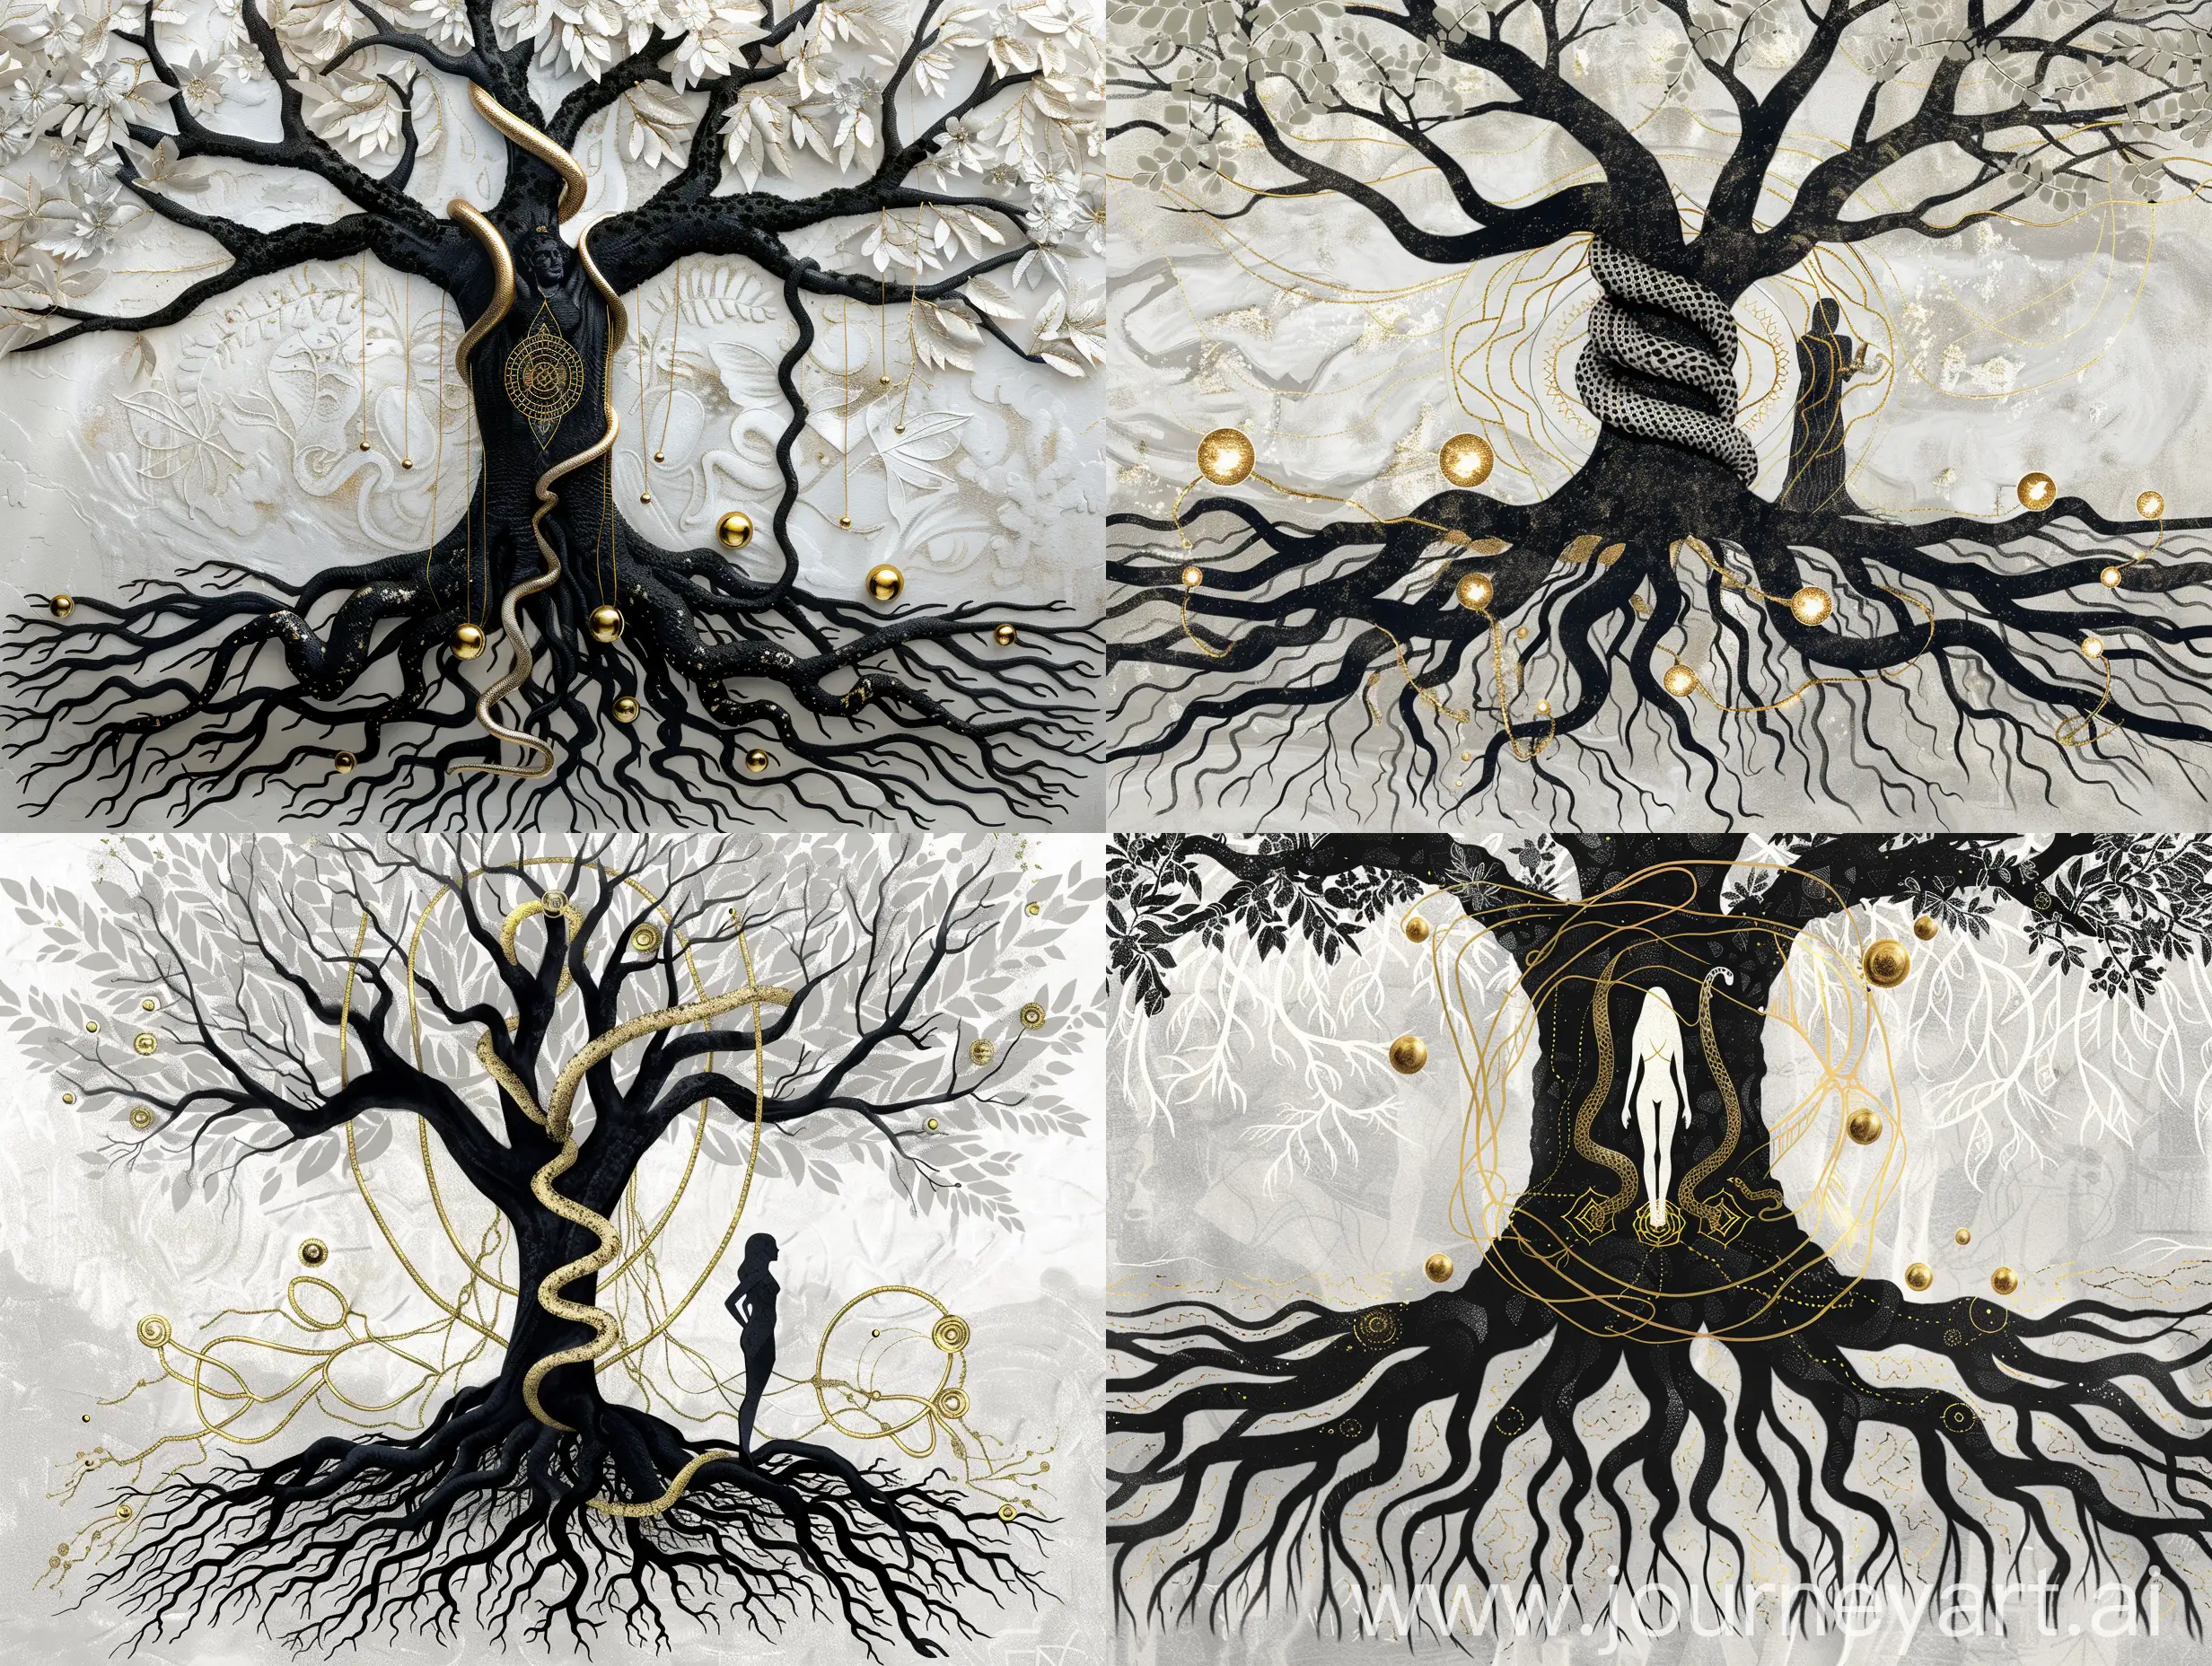 Monochrome-Tree-of-Unconscious-and-Conscious-Minds-with-Serpent-and-Golden-Aura